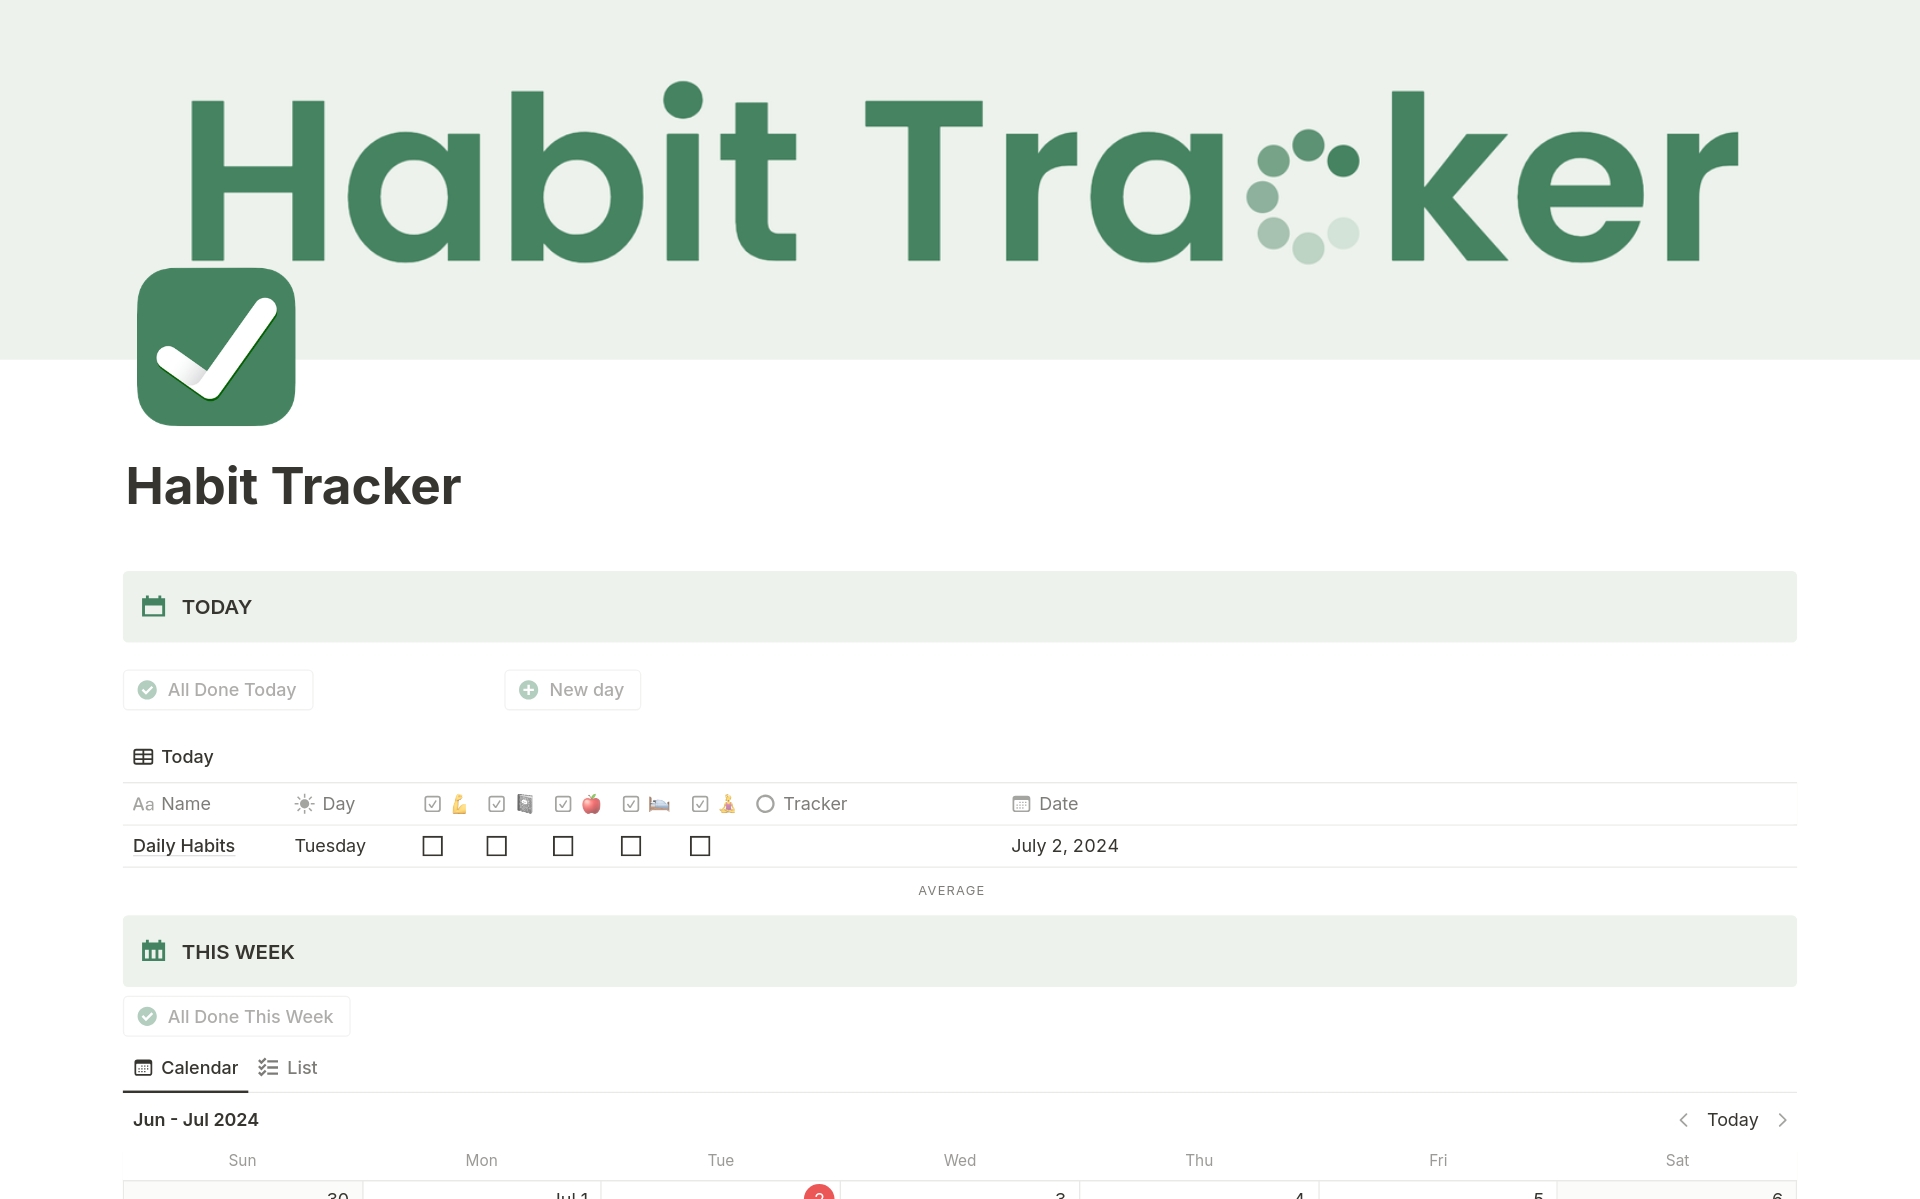 Boost productivity and achieve your goals with our simple yet effective Habit Tracker Template. Track daily habits, visualize progress with a progress bar, and switch between daily, weekly, and monthly views. Perfect for building positive routines. Visit www.jorisbaker.com!